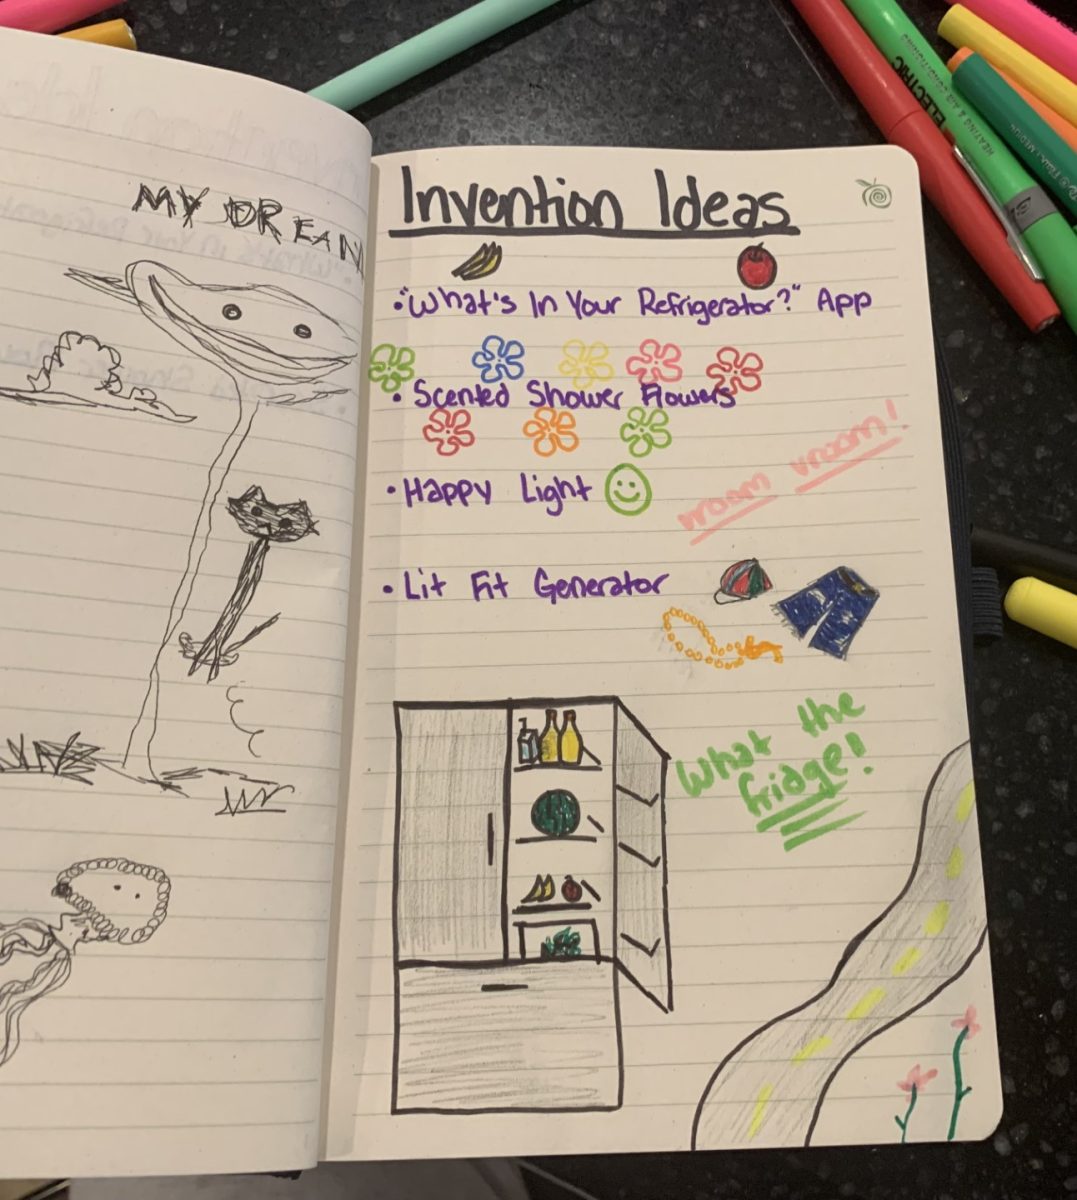 The writer’s personal diary featuring her ideas for inventions as well as her latest dream. Photo courtesy of Finley Malone
